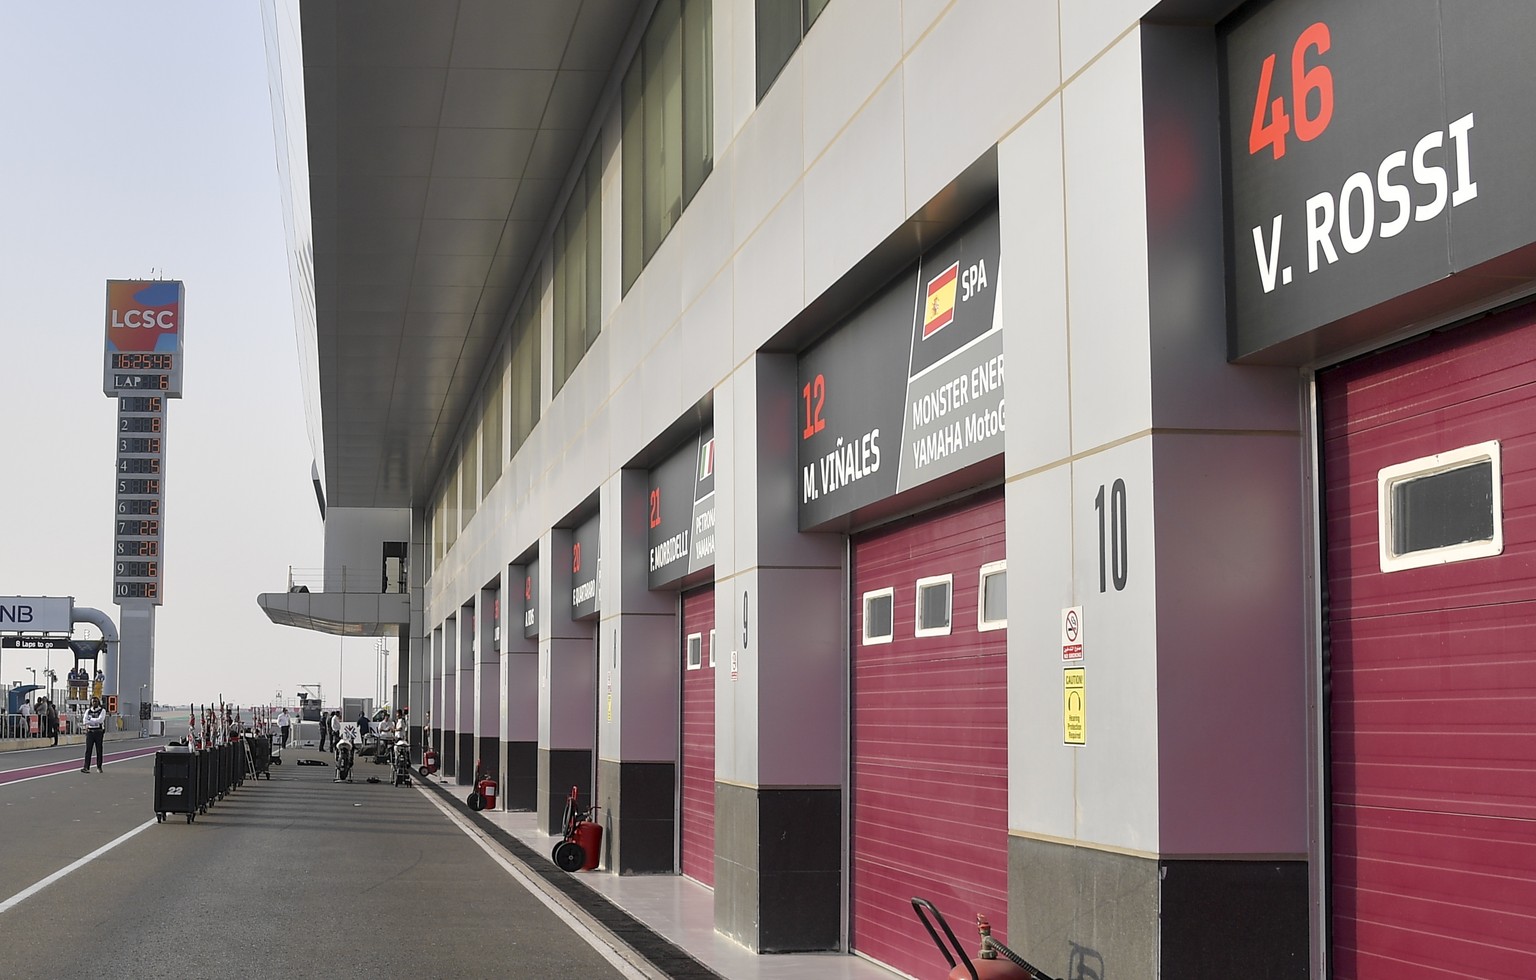 epa08276371 The garages are closed at the Losail International Circuit after cancelling the Qatar MotoGP race, in Doha, Qatar, 07 March 2020. The season-opening MotoGP race in Qatar was cancelled beca ...